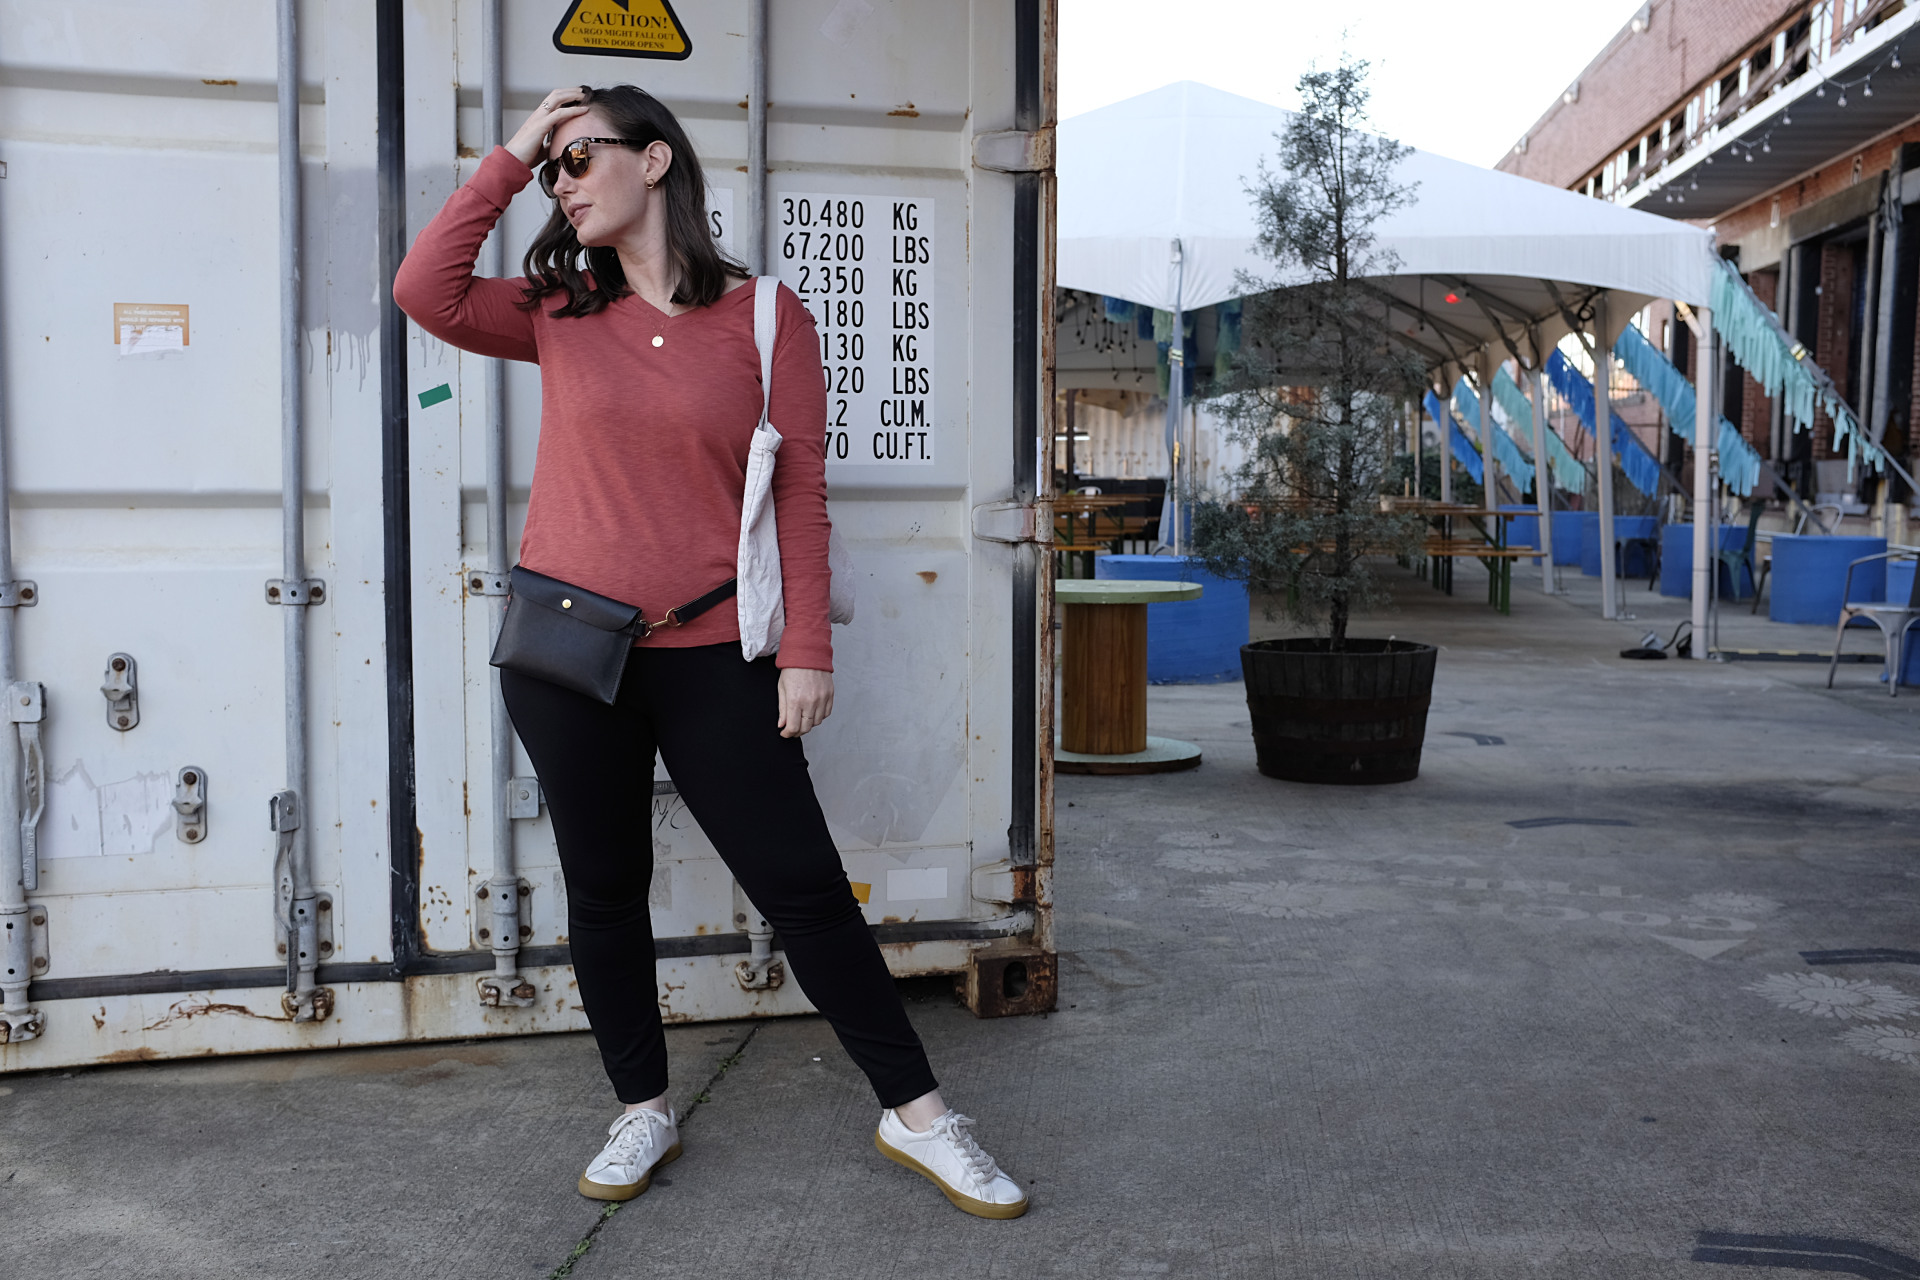 A white woman stands in front of a shipping container, which is in front of a large tent. She is wearing a red-orange long sleeve tee, black pants, white sneakers, a black belt bag, tortiseshell sunglasses, and is carrying a tote. She has her hand in her hair and is starting to her right.